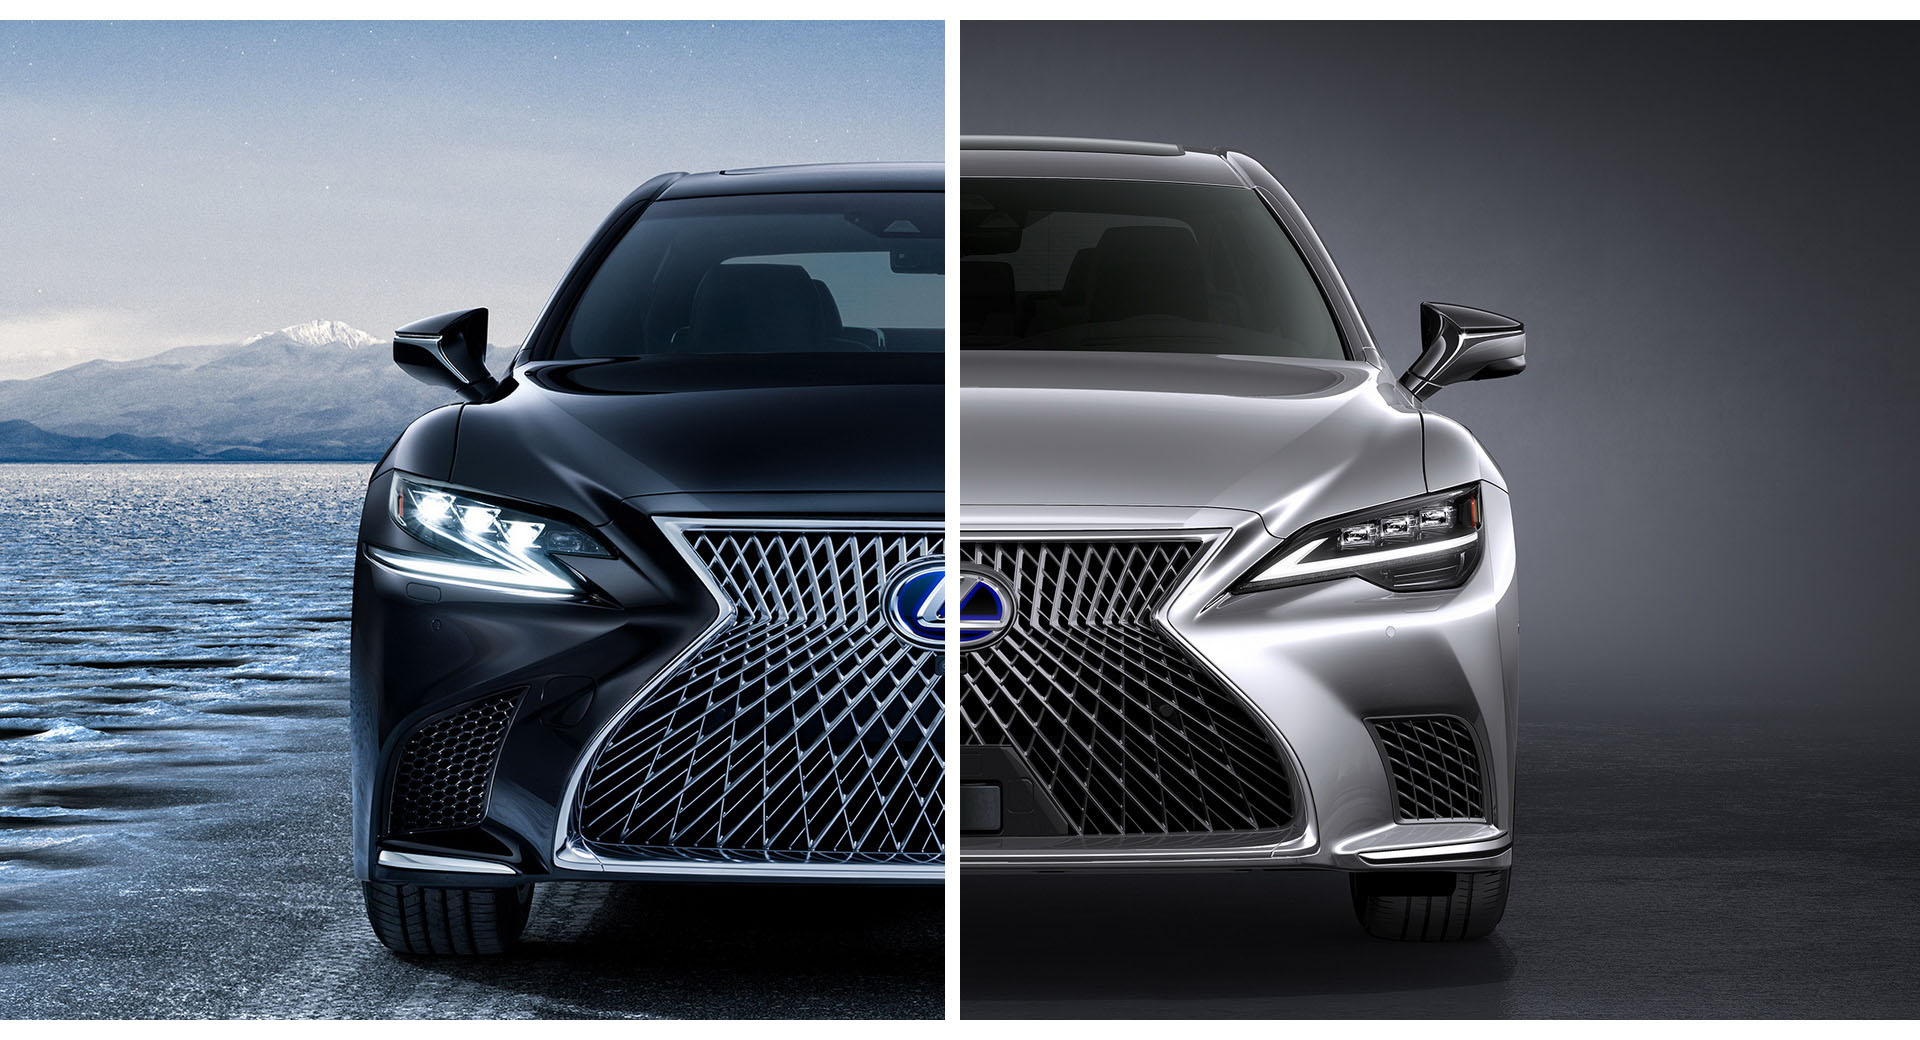 Does The 2021 Lexus LS Look Fresh Enough Compared To The Outgoing Model? |  Carscoops